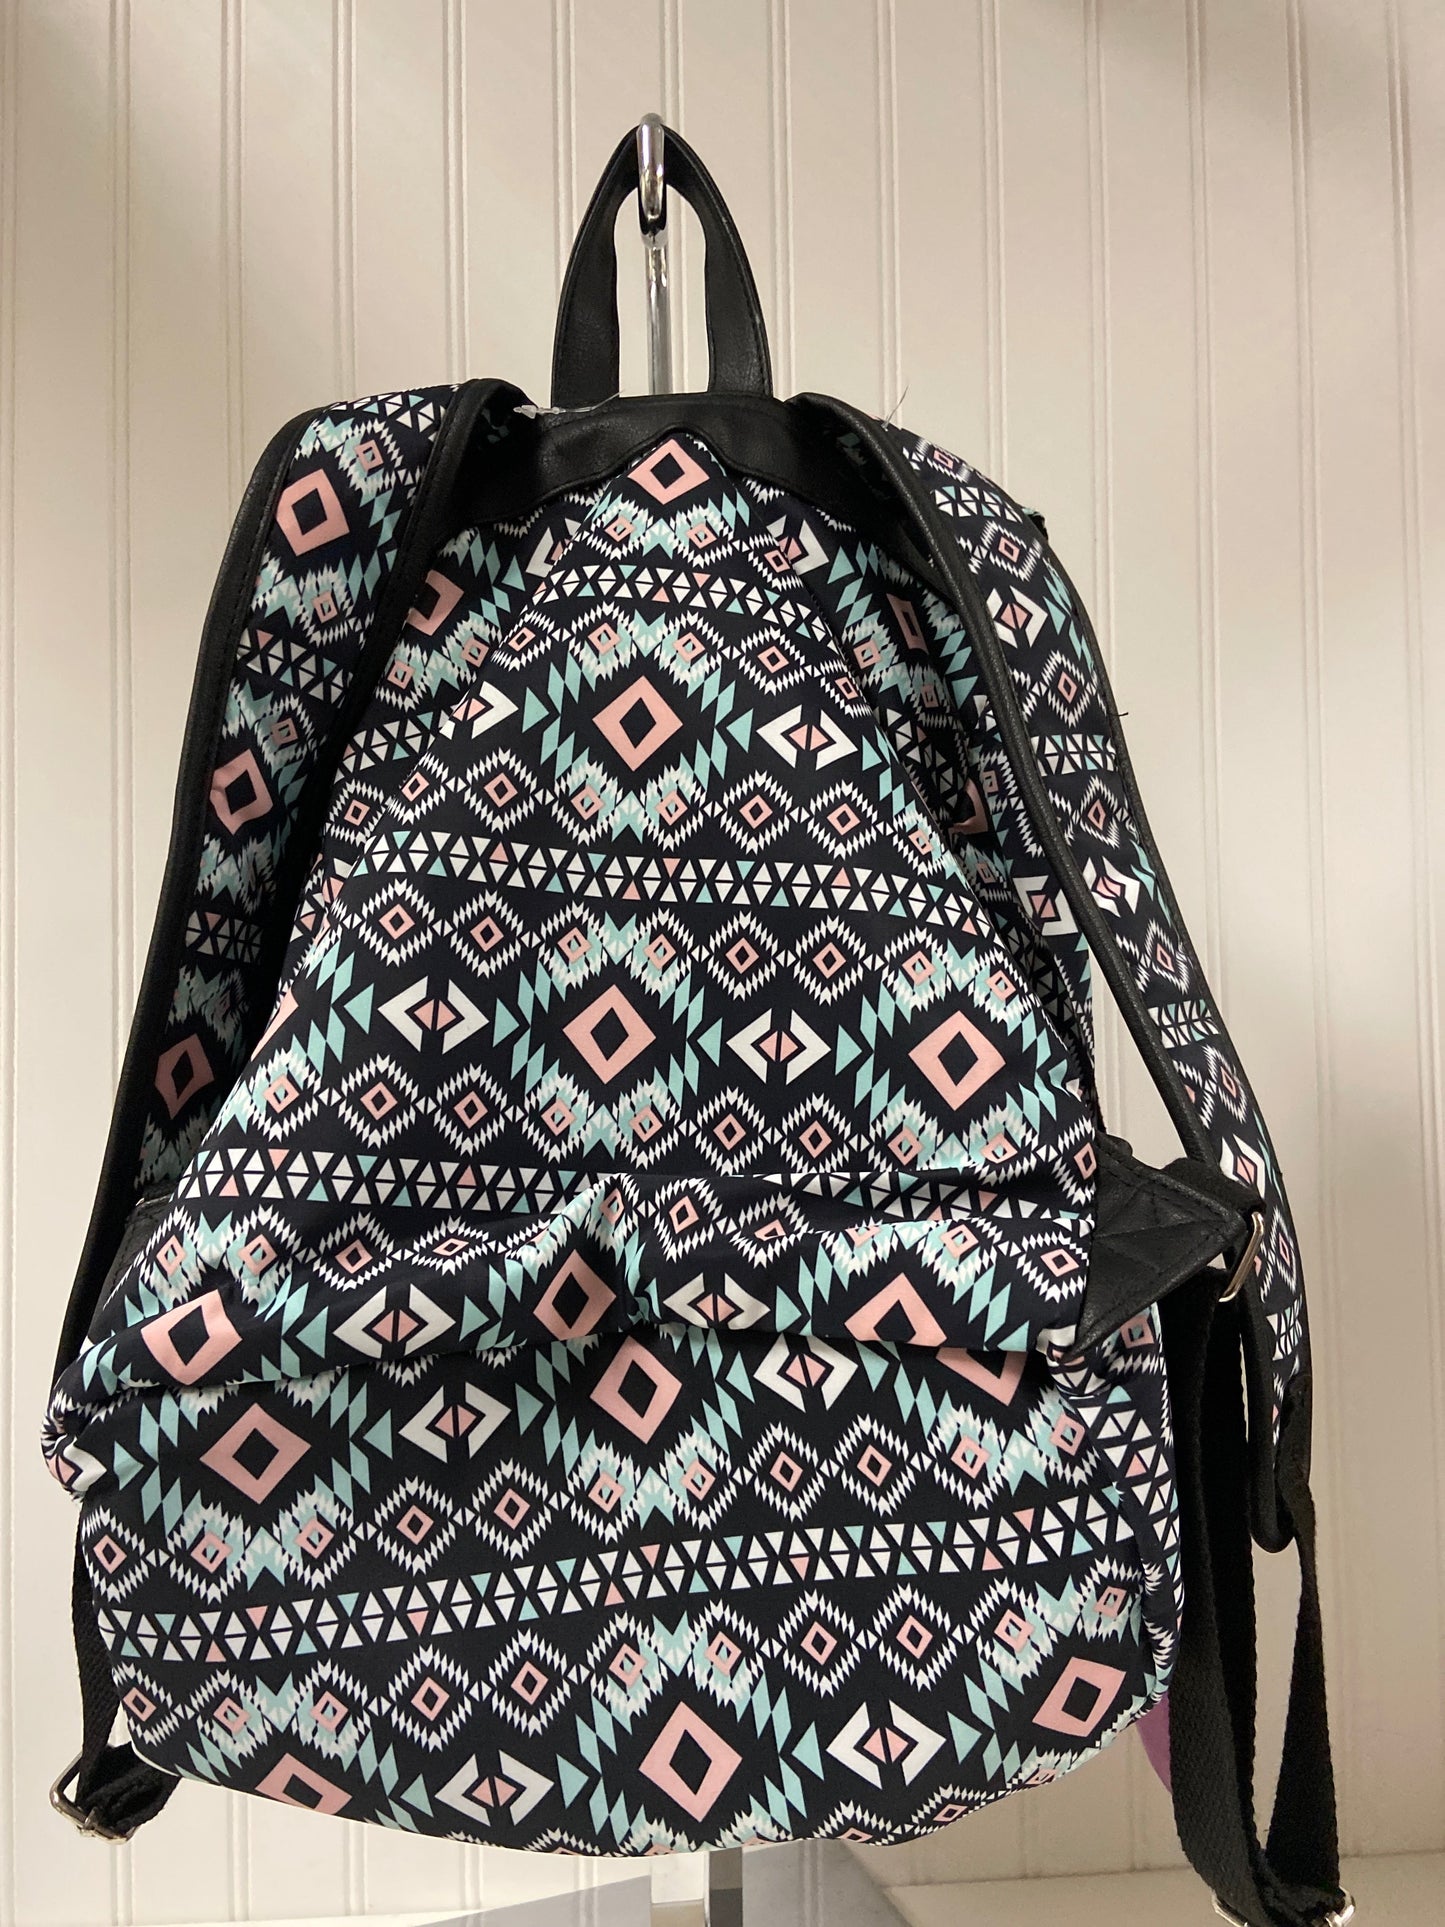 Backpack Clothes Mentor, Size Large